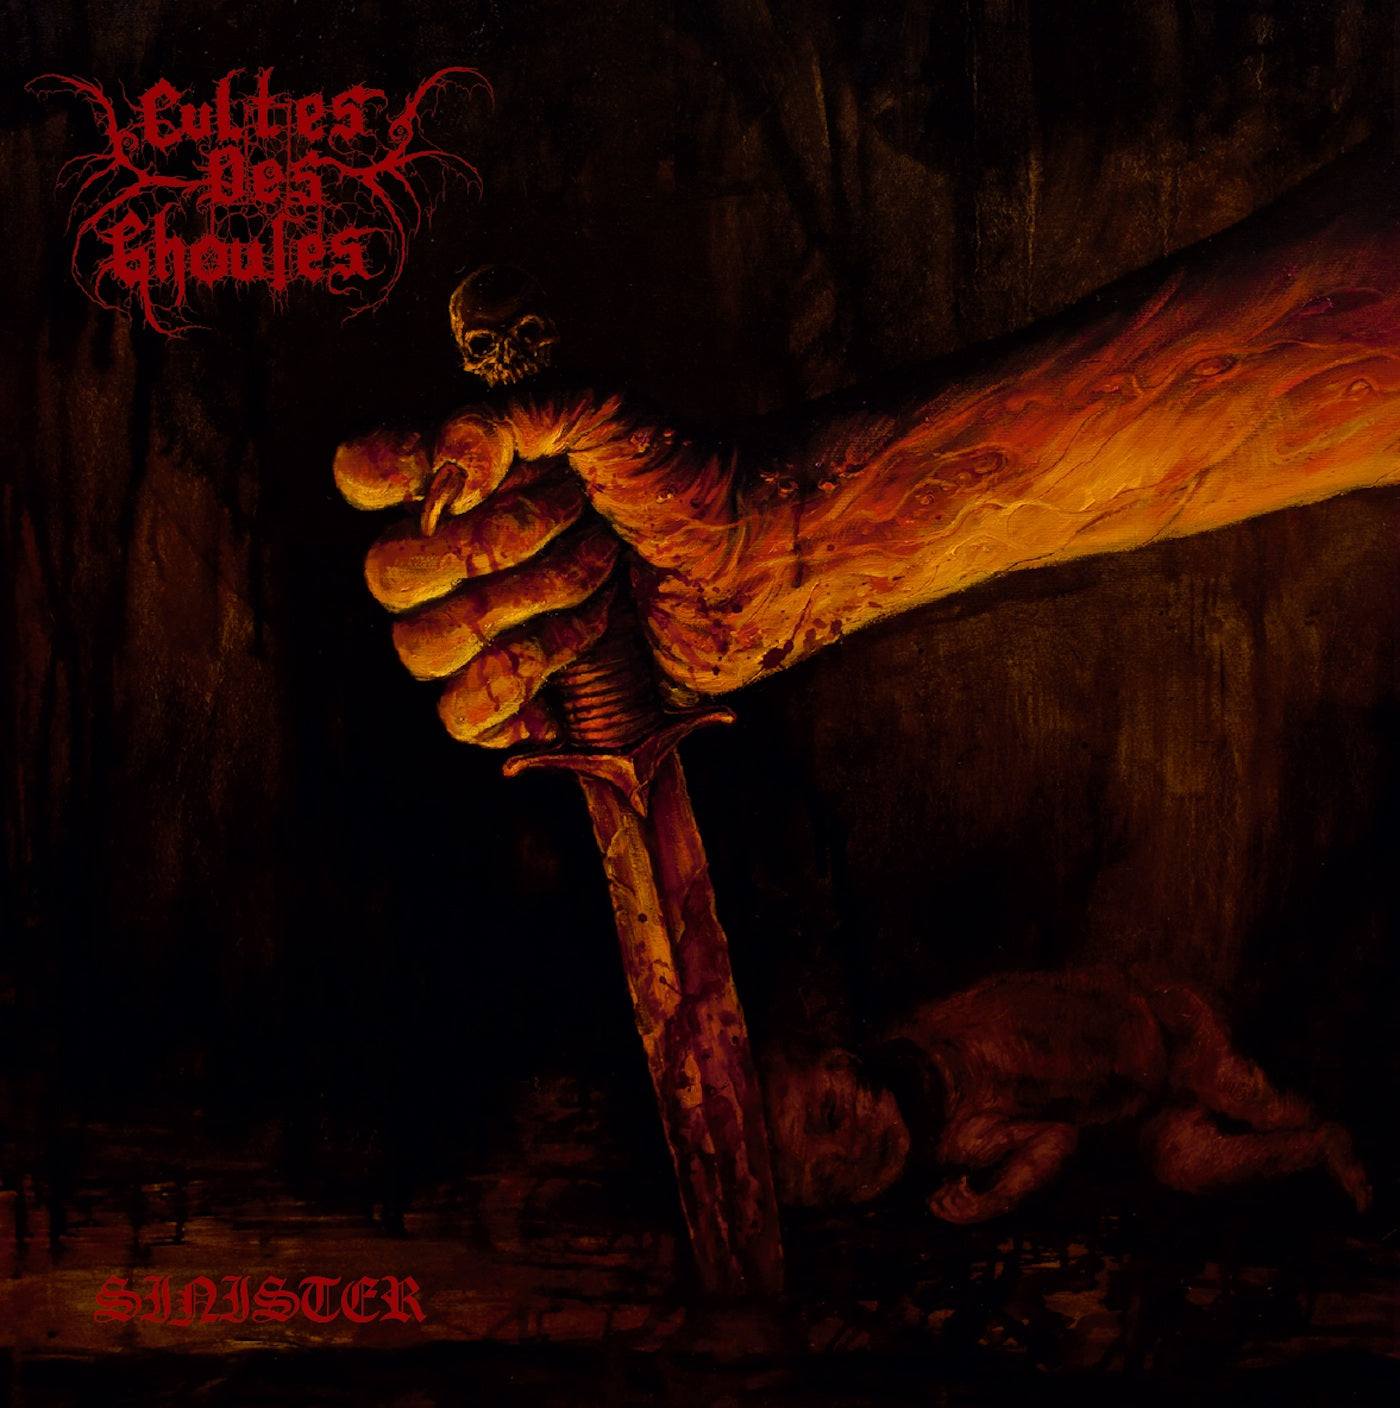 Cultes Des Ghoules - Sinister, Or Treading The Darker Paths (12" Gatefold DOUBLE LP)